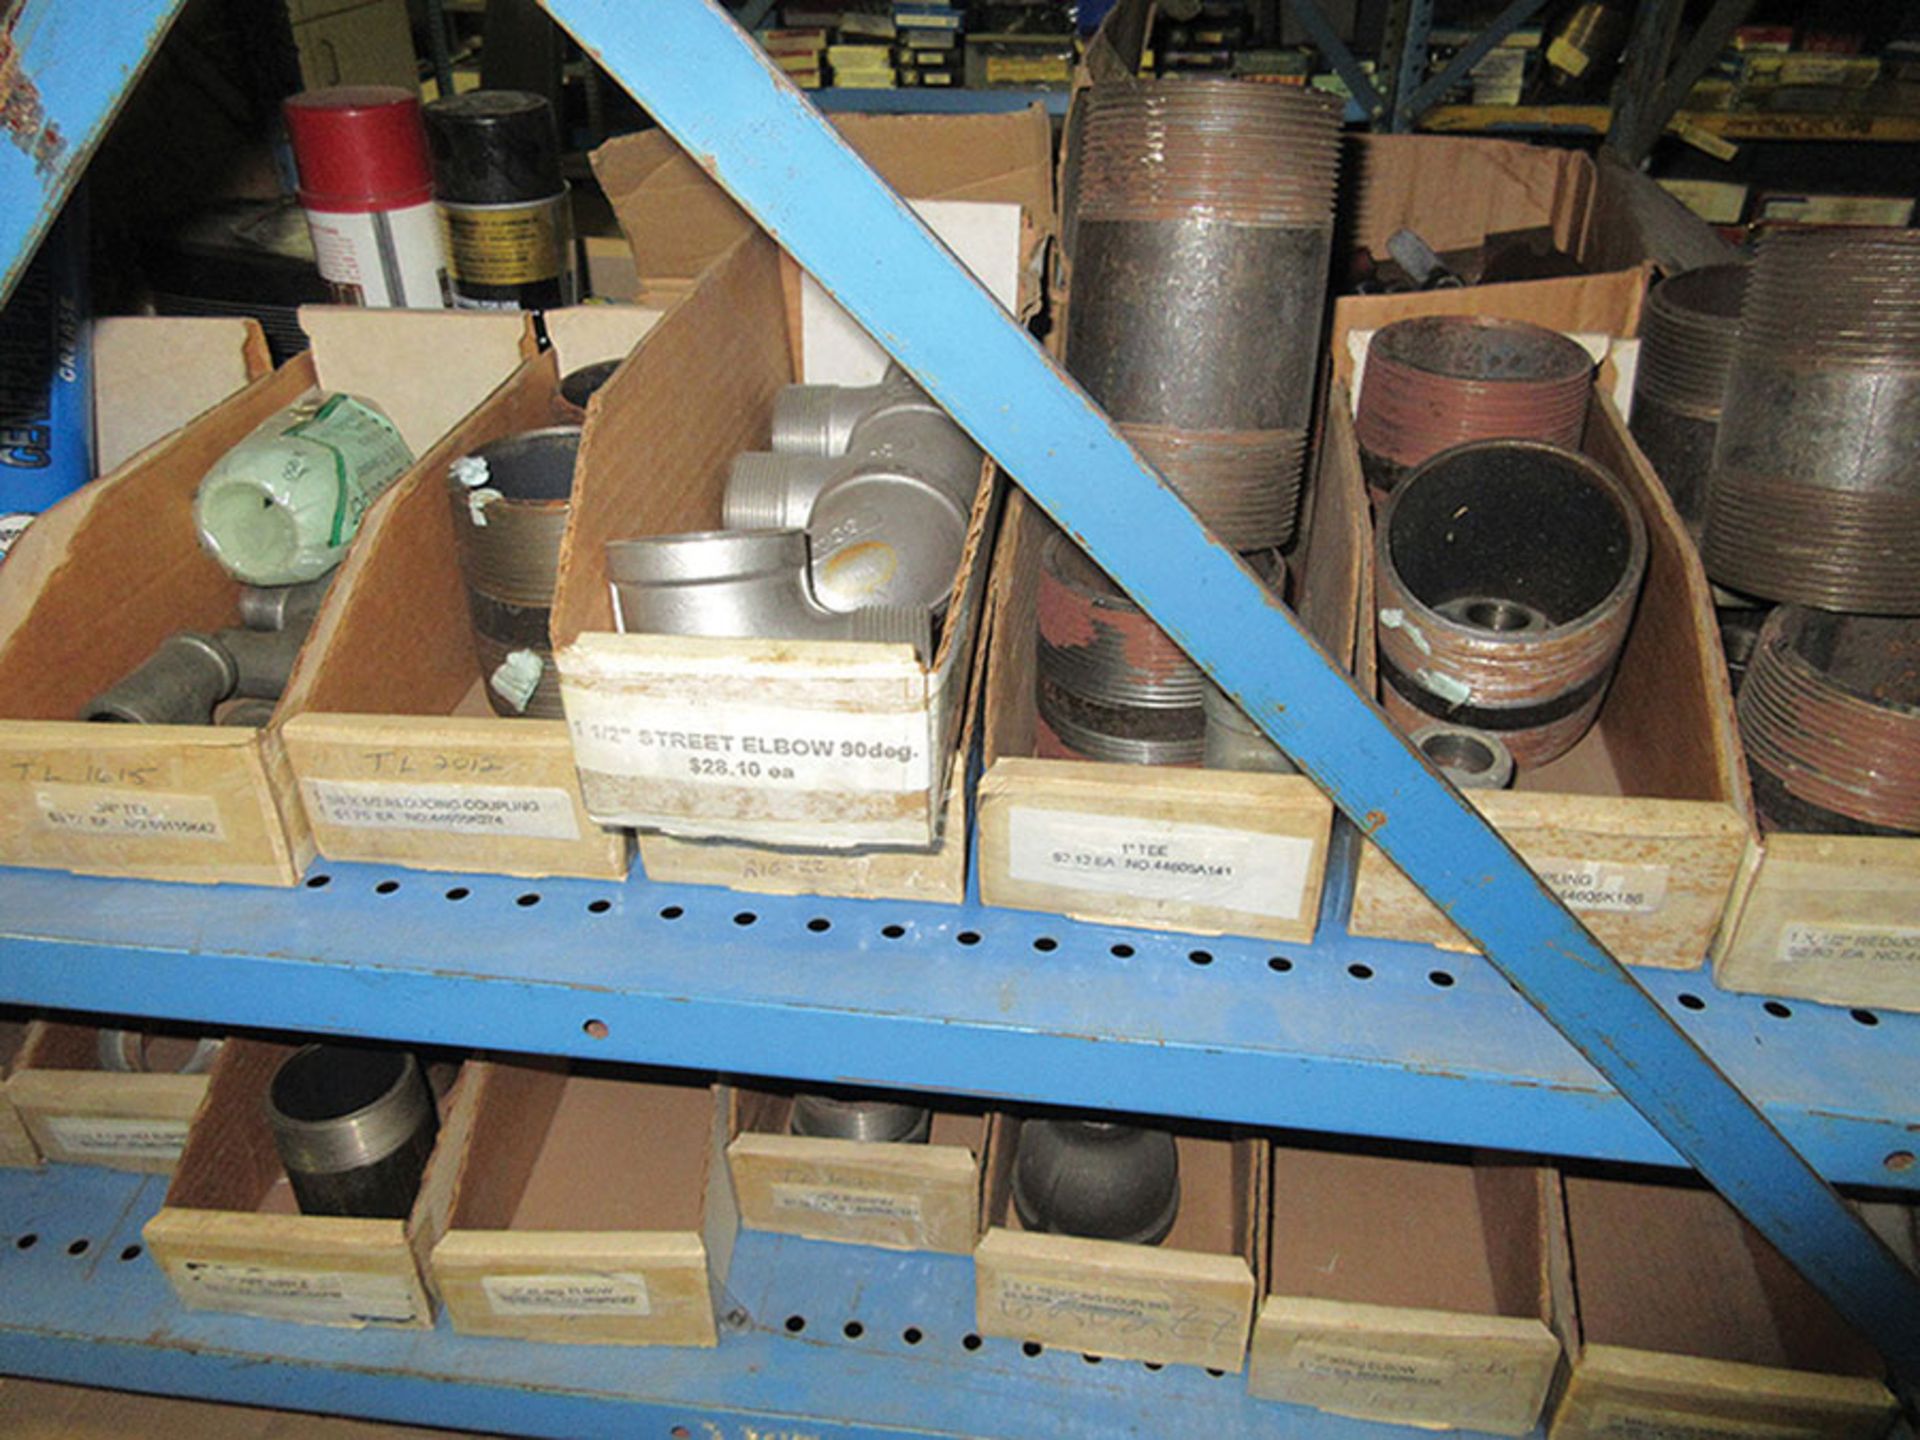 CONTENTS ON LOWER SECTION OF SHELF UNIT: DIE SPRINGS, GATE VALVES, COUPLINGS, UNIONS, AND TEES *** - Image 7 of 8